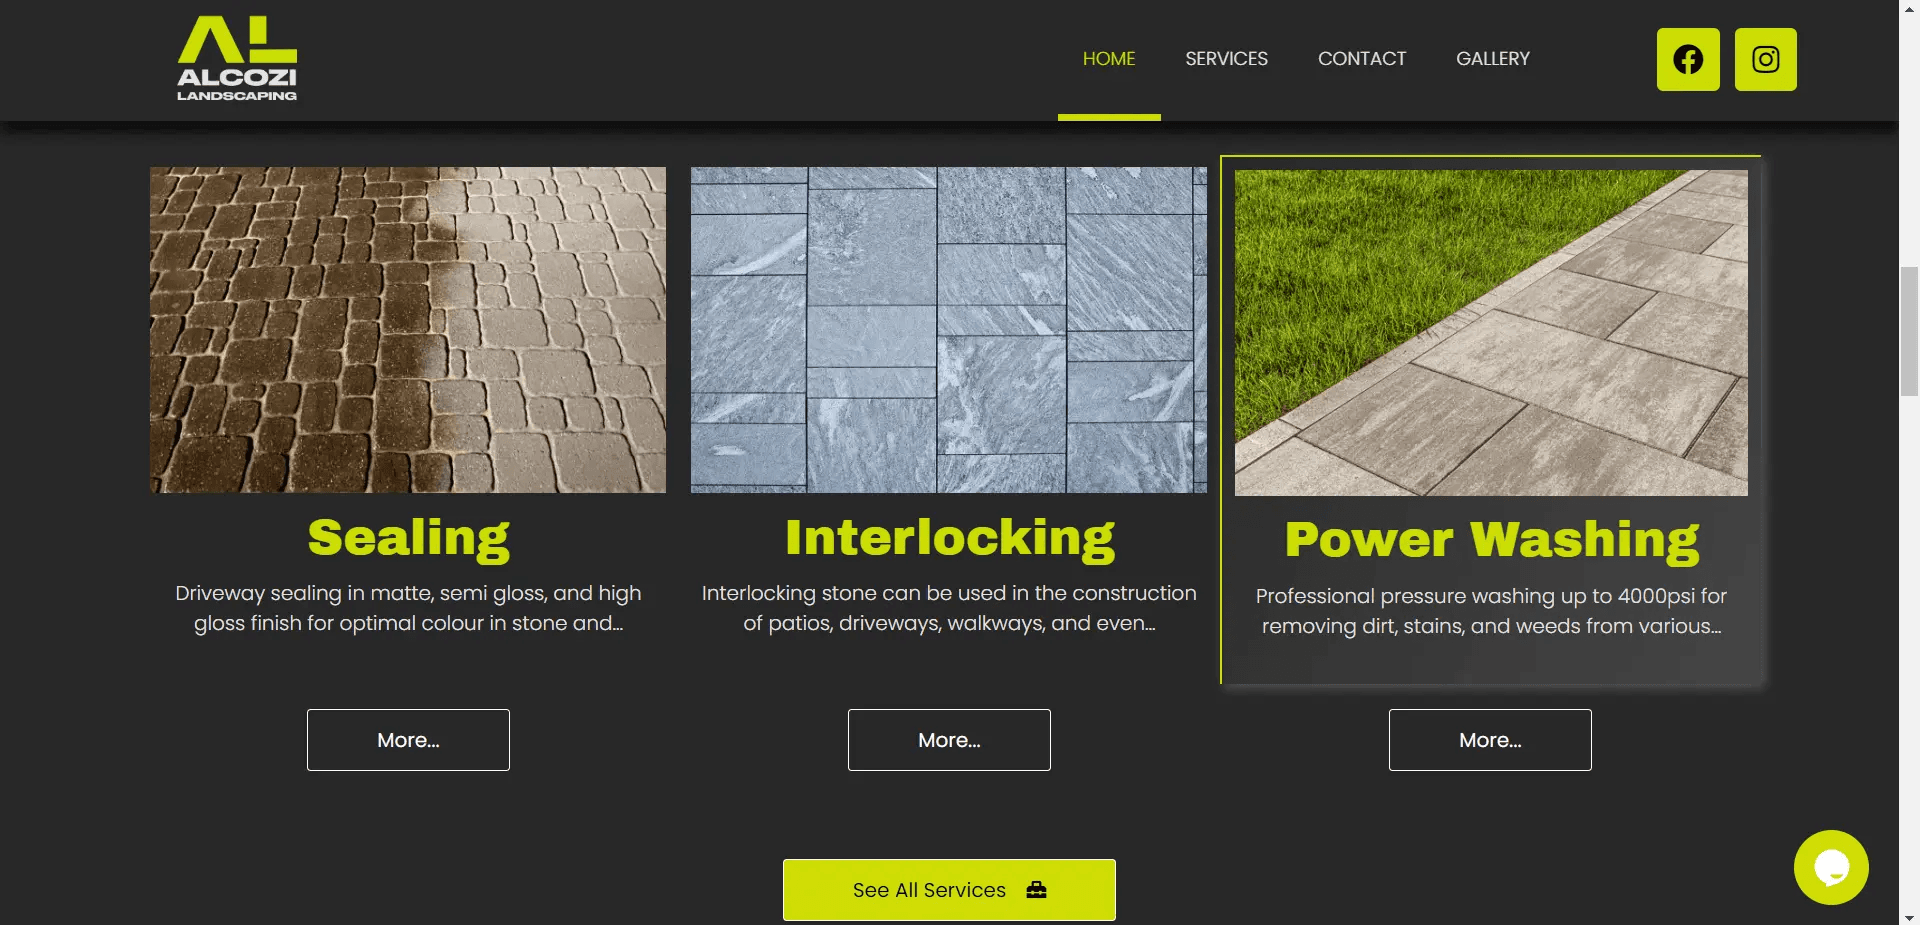 Examples of sealing, interlocking, and power washing services offered by the company